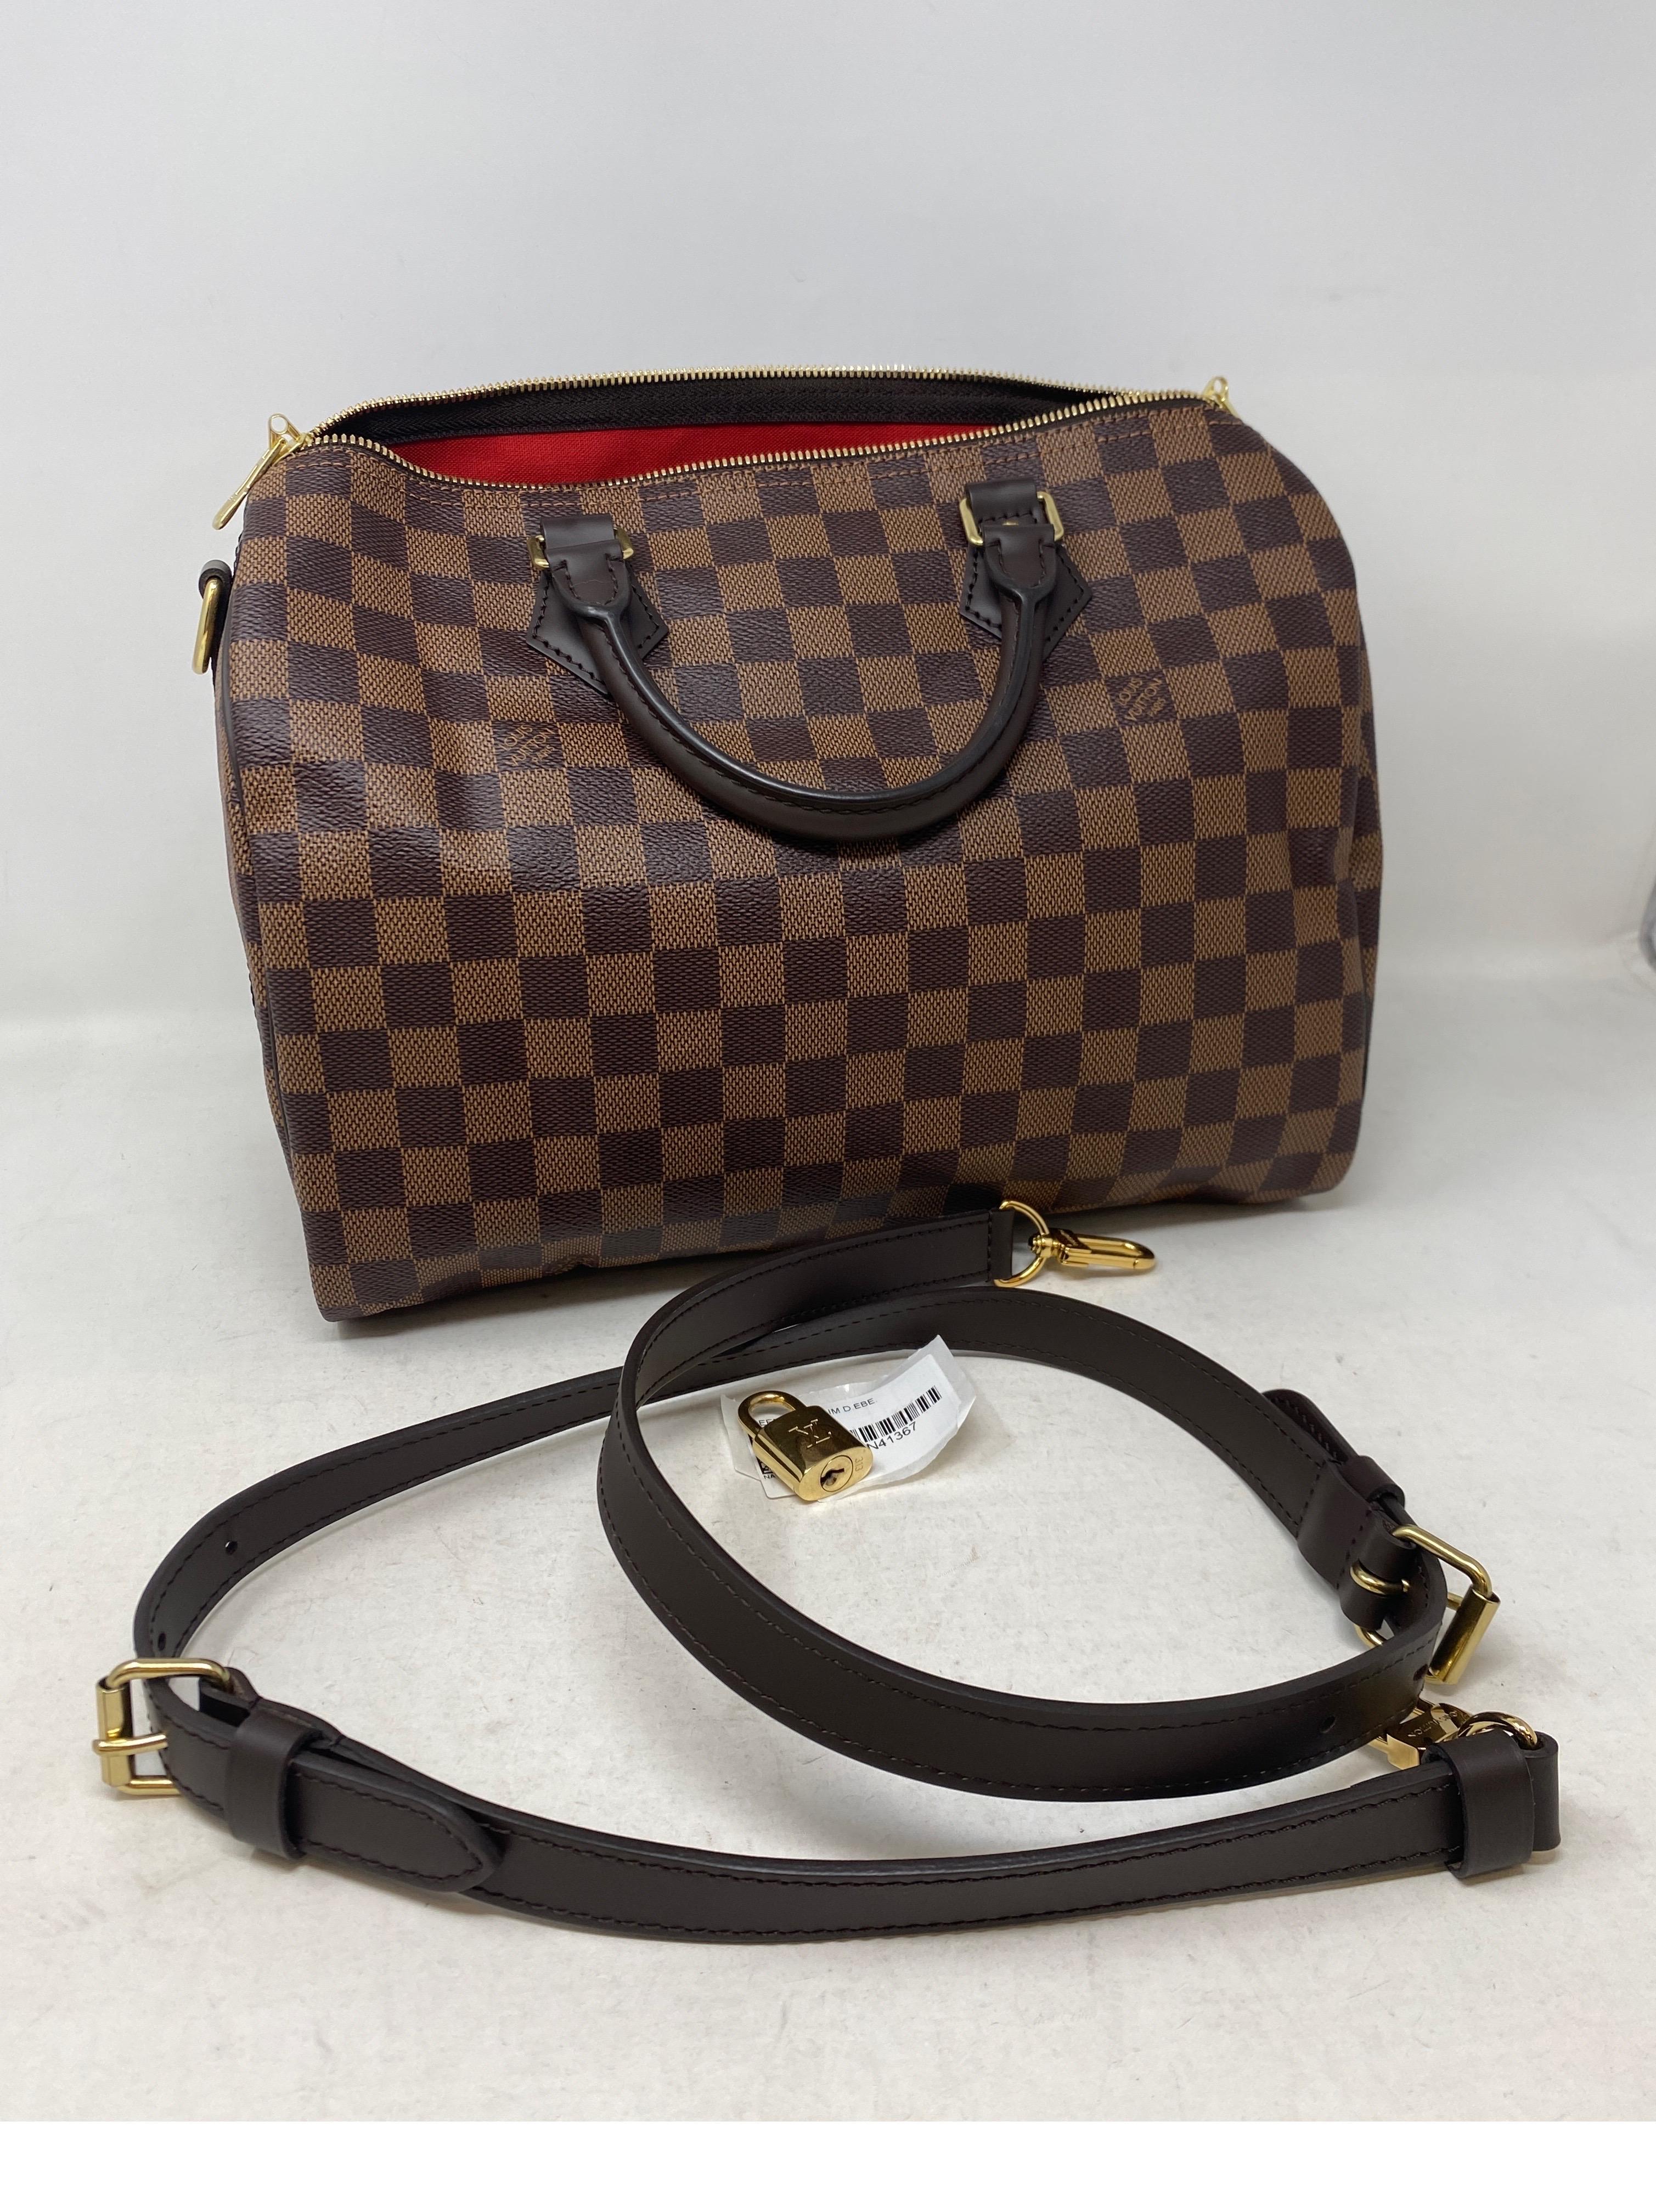 Louis Vuitton Speedy 30 Bandouliere. Damier ebene Speedy 30 with strap. Brand new condition. Never used. Classic speedy with detachable strap. Can be shortened or worn longer. Includes lock, keys, strap, and dust bags. Guaranteed authentic. 